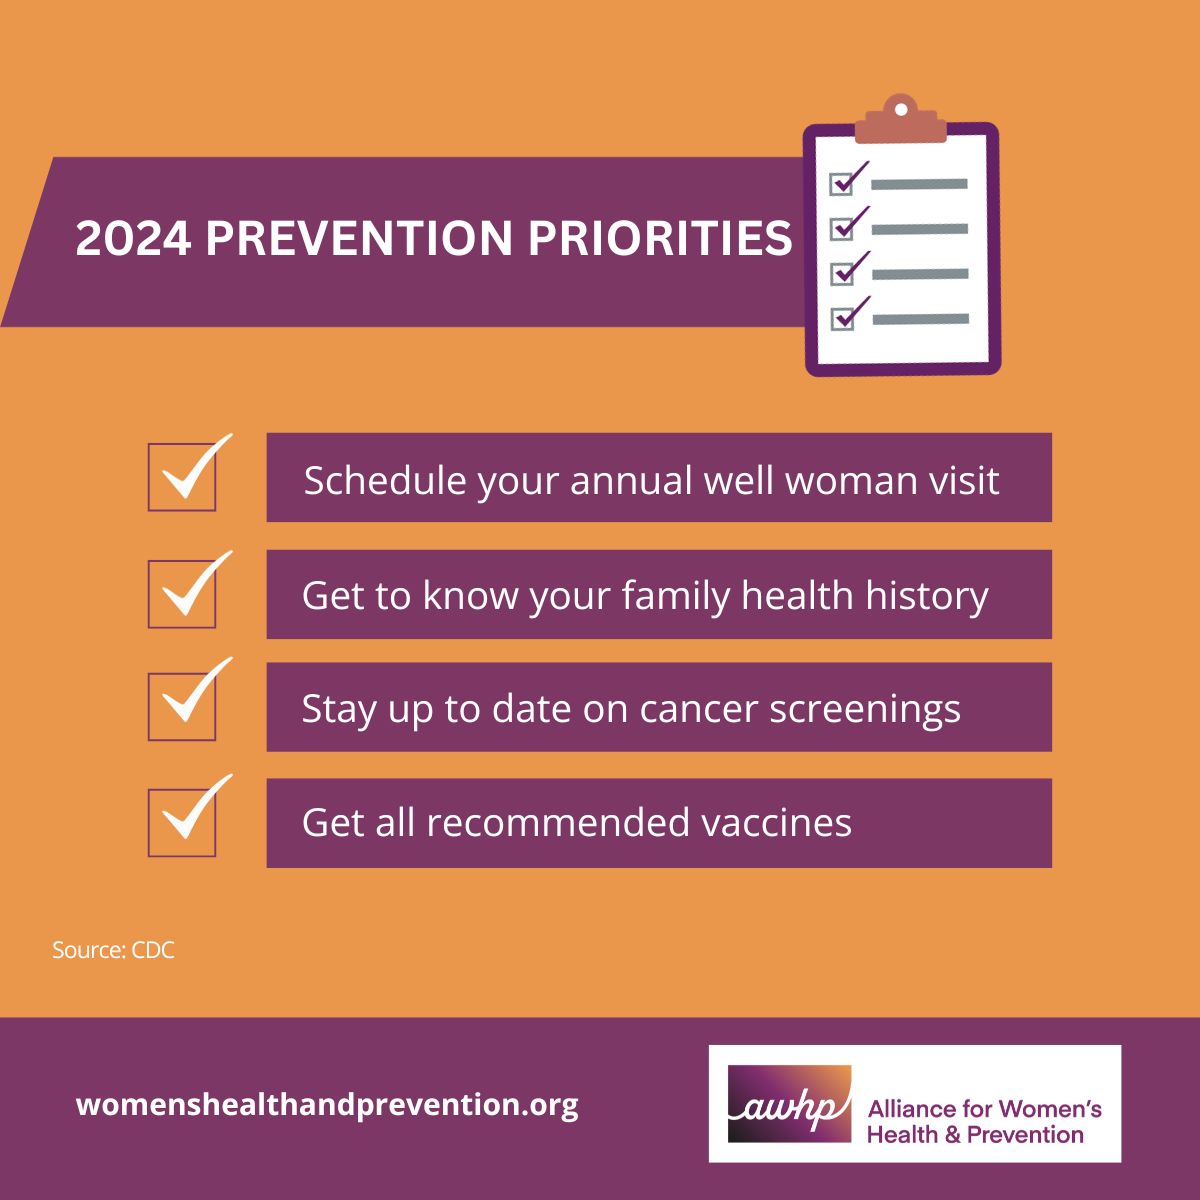 This new year, make sure you take the time to stay up to date on your preventive care. Receiving regular medical and dental check-ups, #cancerscreenings, #vaccines, and knowing your #familyhistory is crucial to staying healthy. Make your 2024 checklist today!